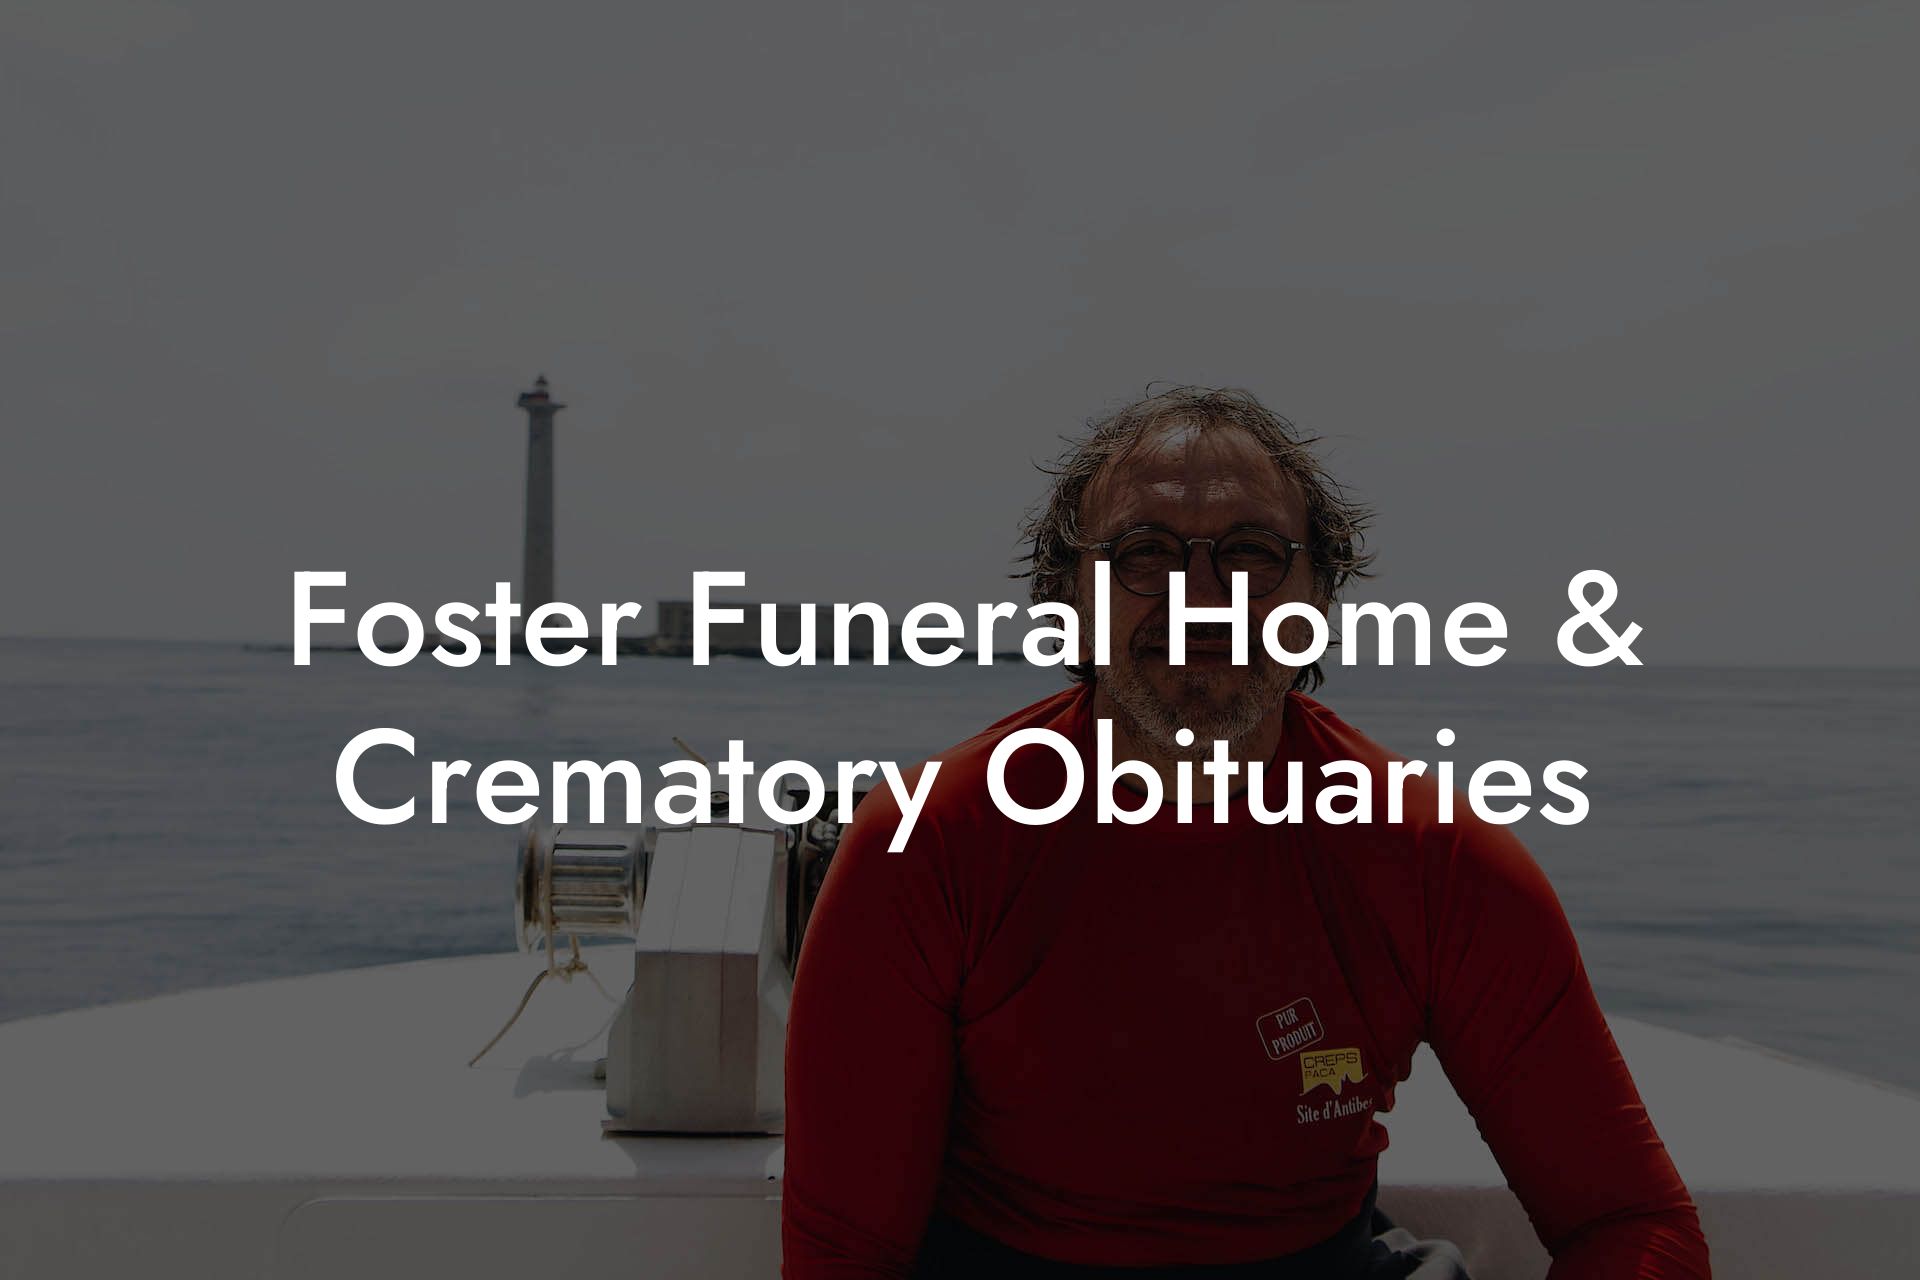 Foster Funeral Home & Crematory Obituaries